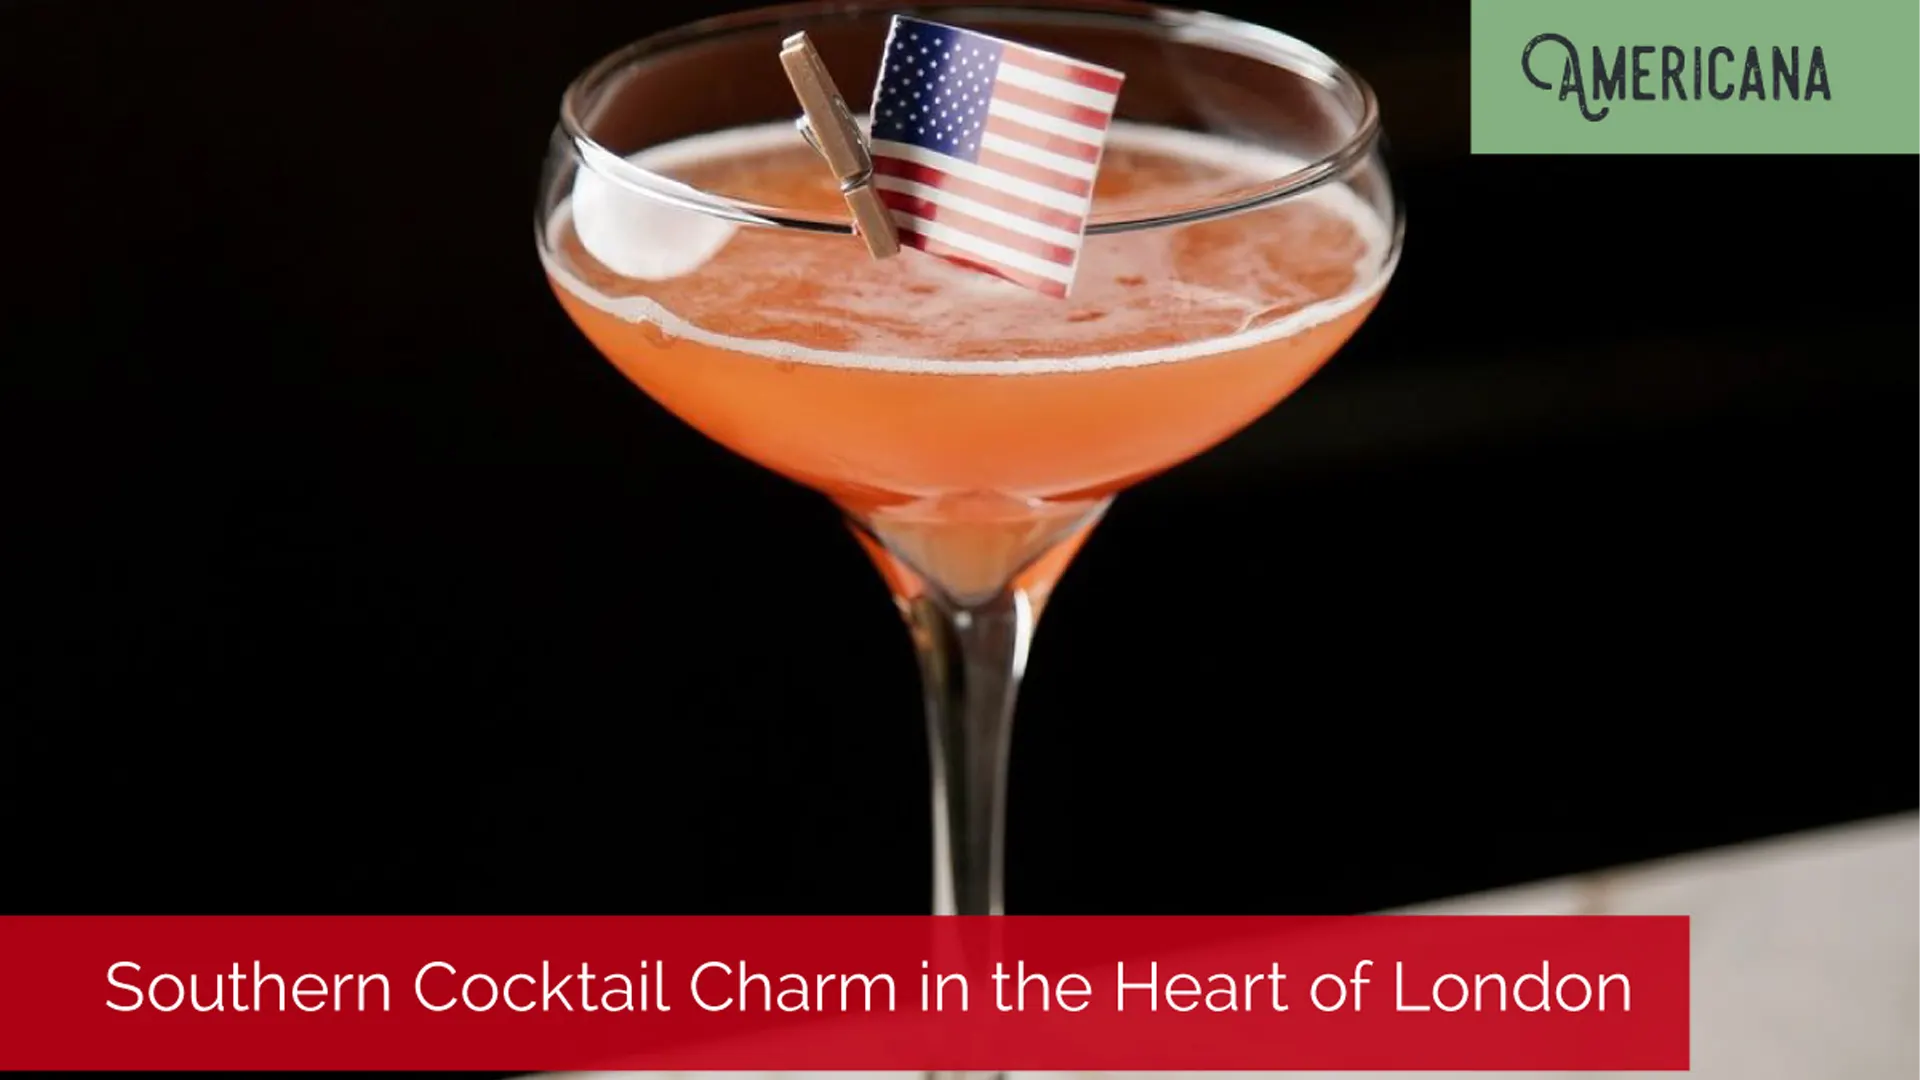 Southern Cocktail Charm in the Heart of London